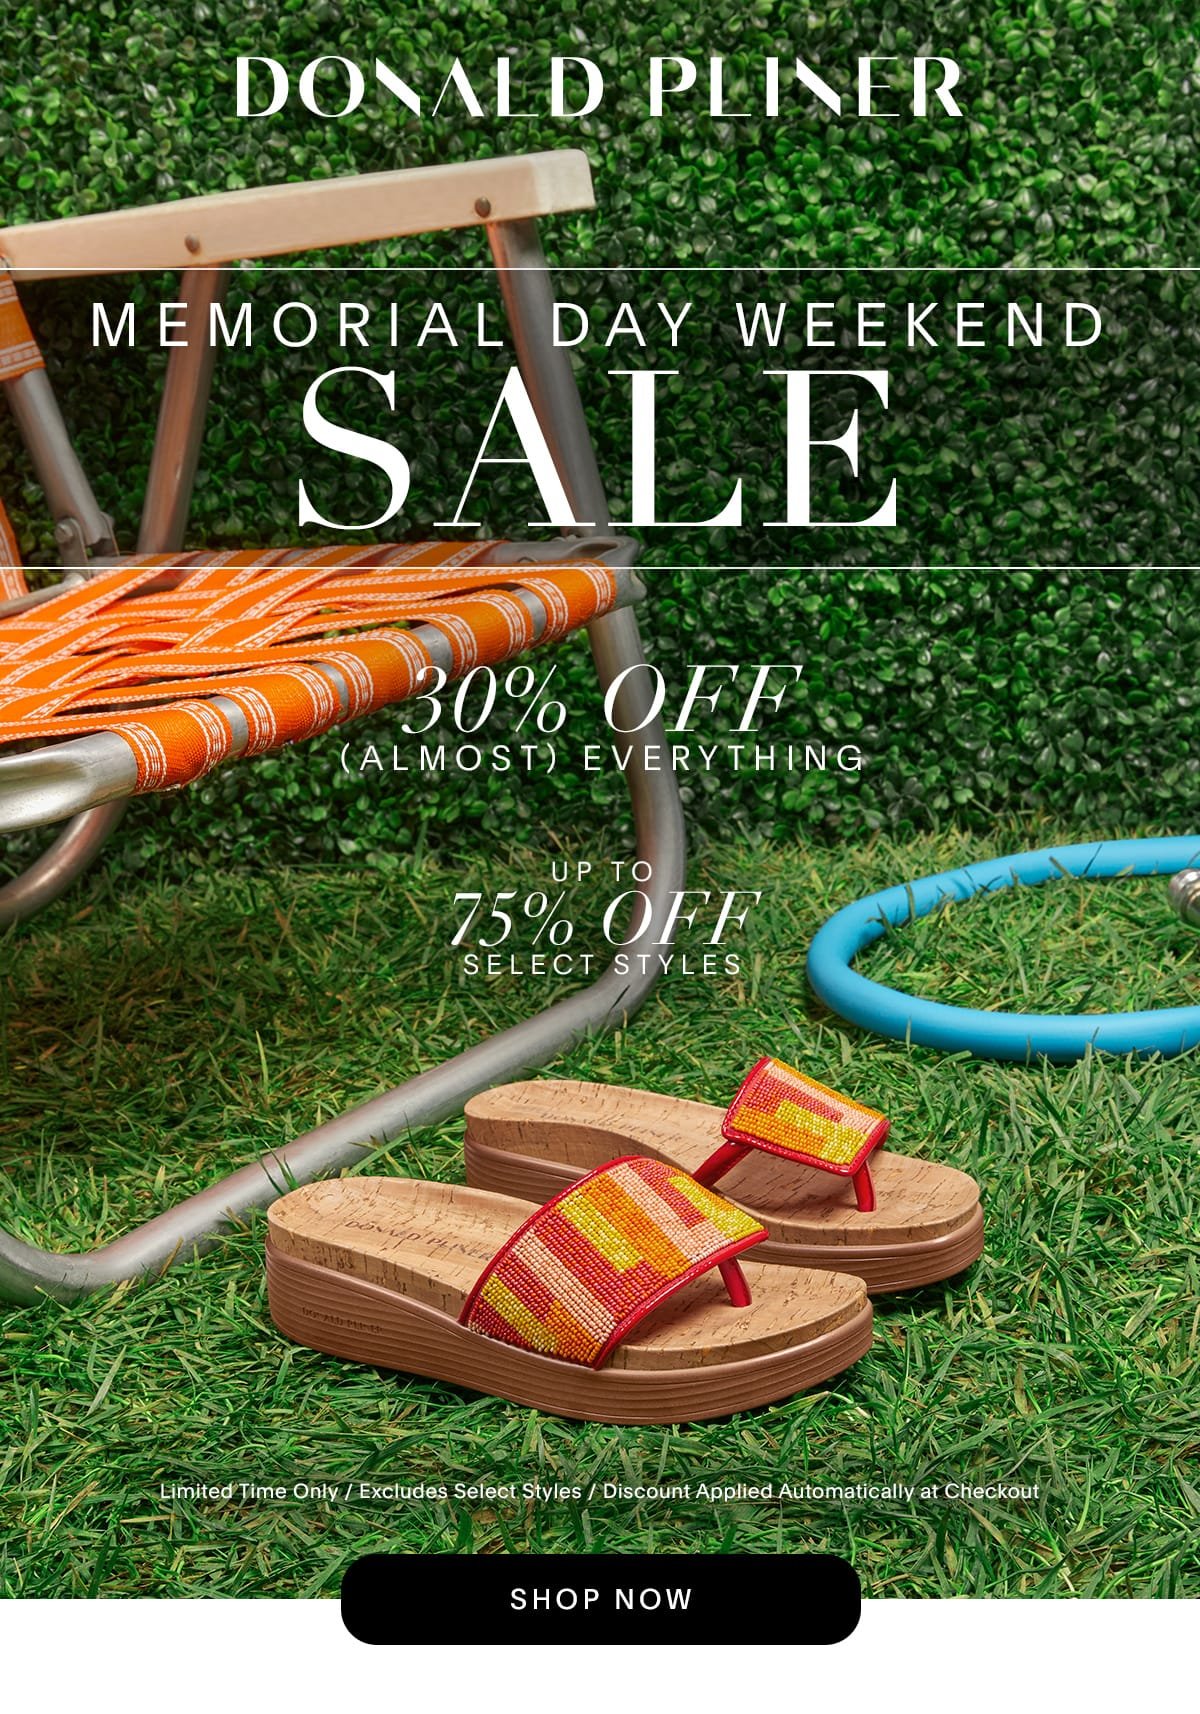 Donald Pliner. Memorial Day Weekend Sale. 30% Off (Almost) Everything. Up to 75% Off Select Styles. Limited time only / Excludes select styles / Discount Applied Automatically at Checkout